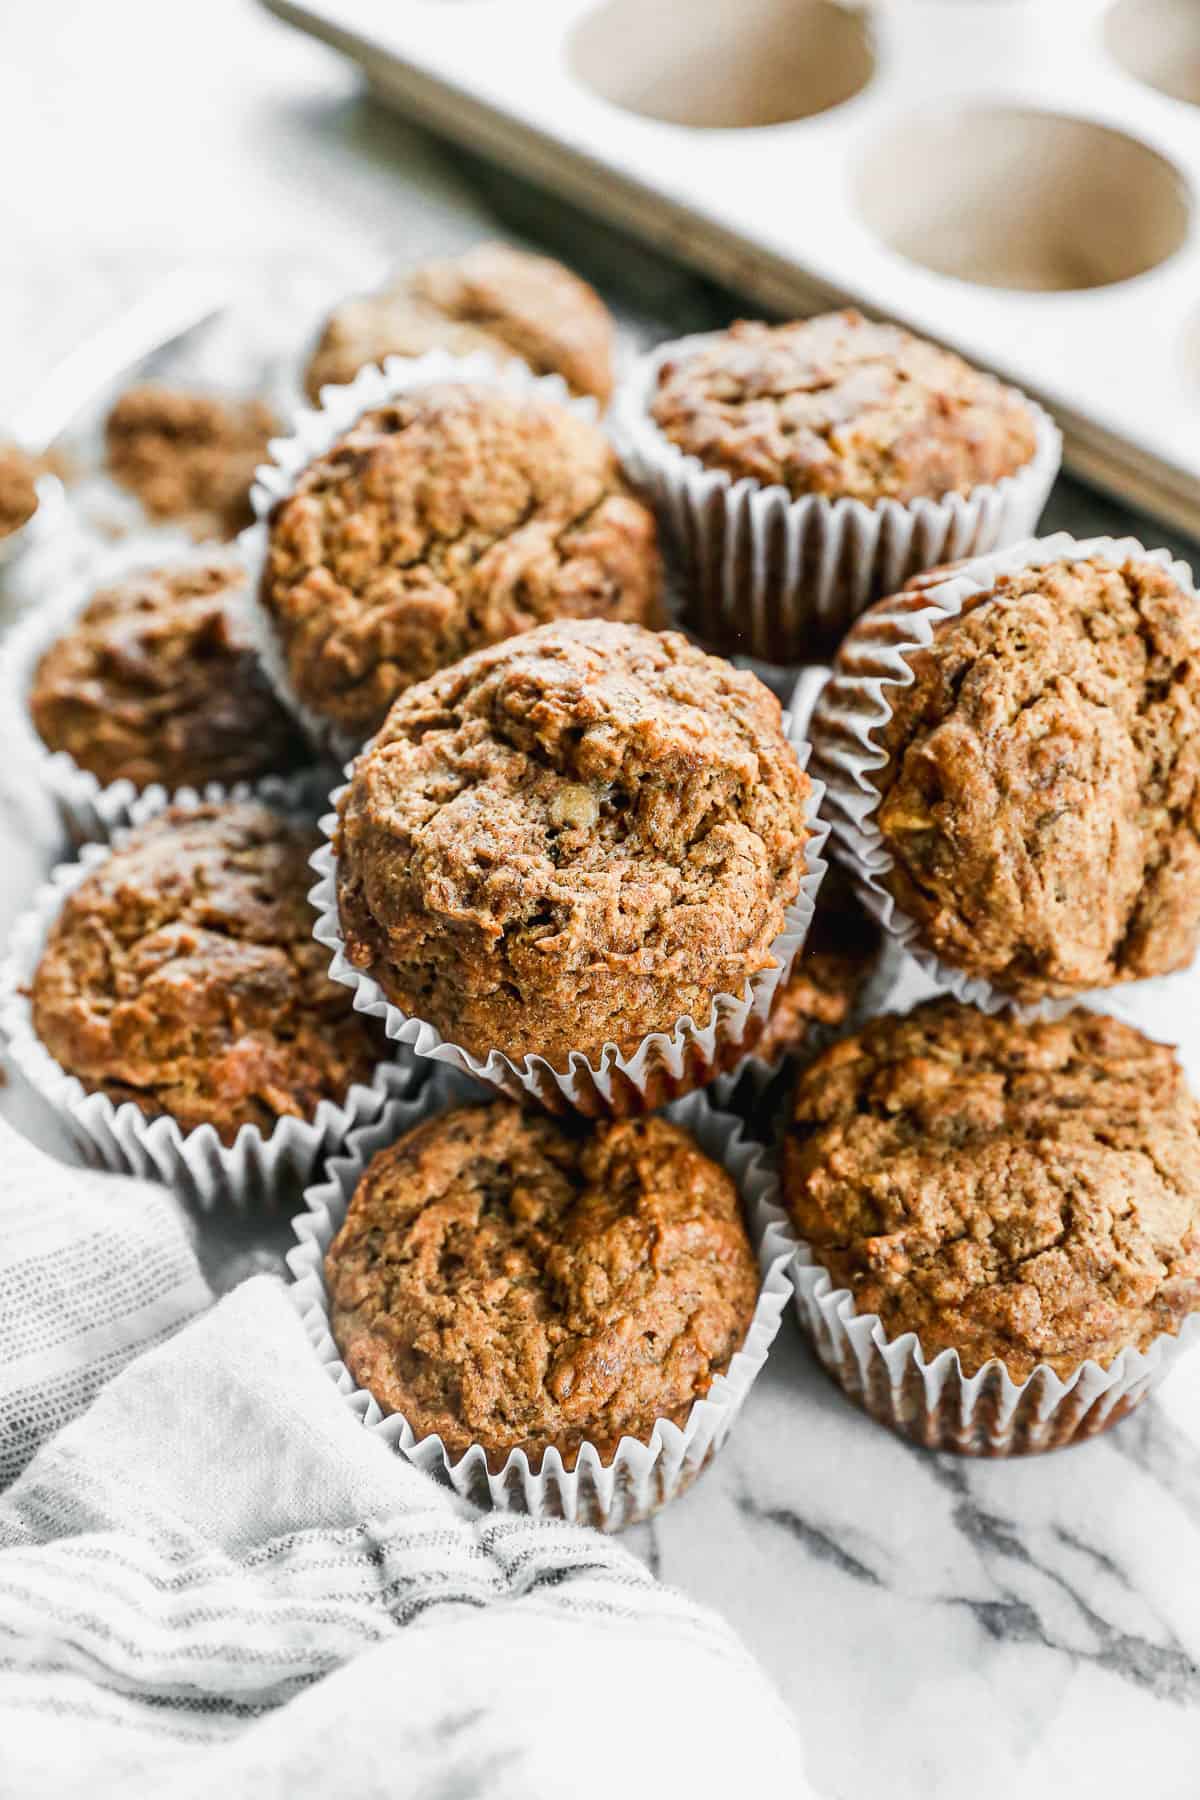 A pile of Healthy Banana Muffins, ready to enjoy.